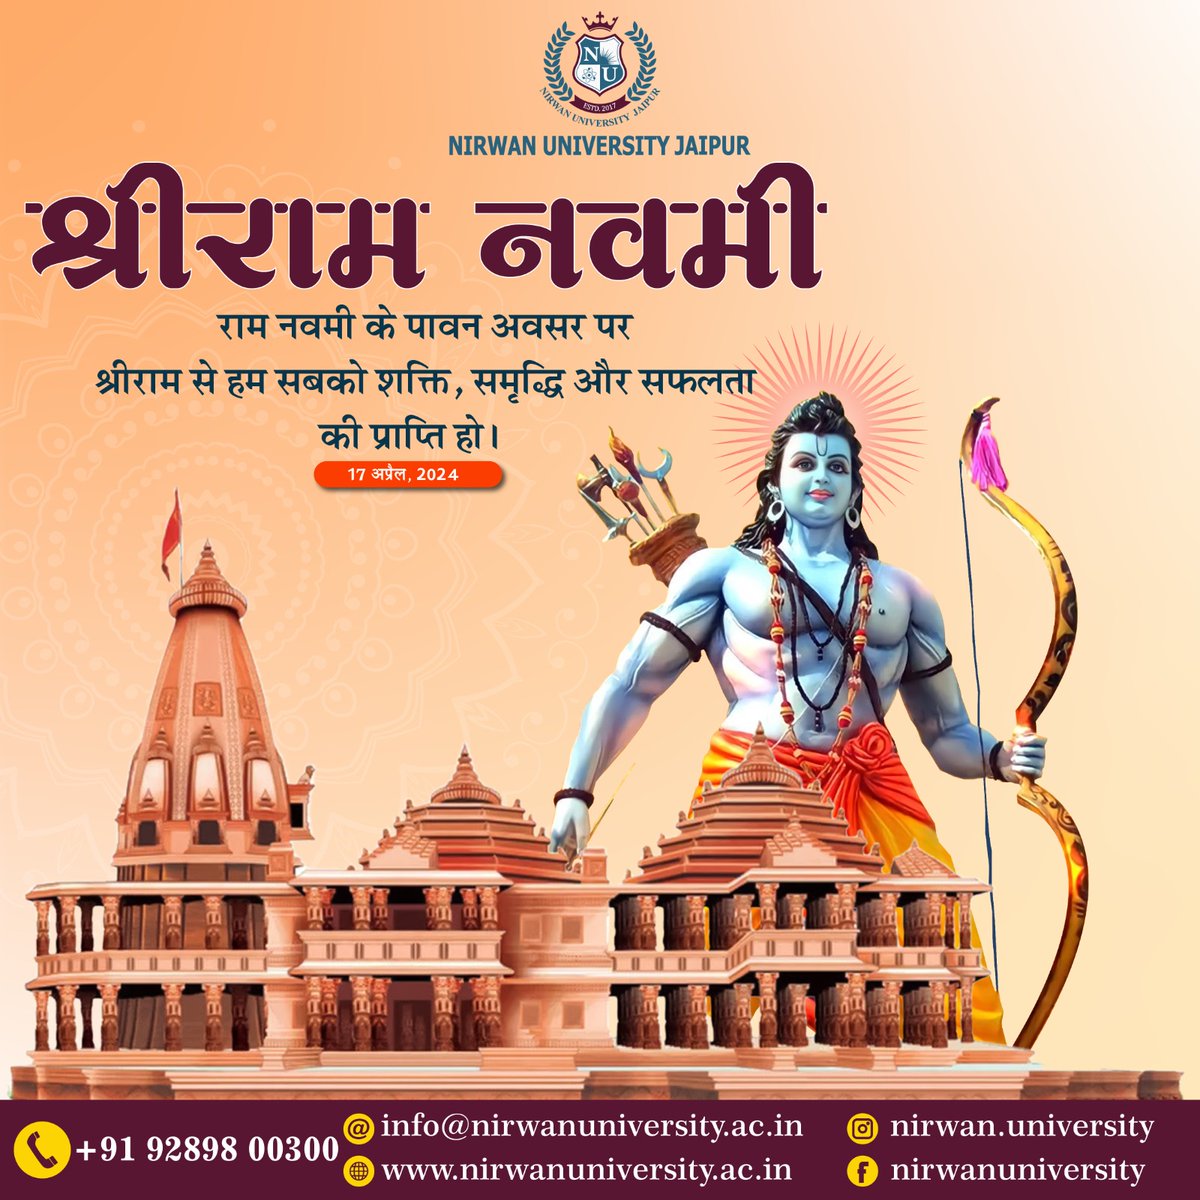 Embrace the divine blessings of Rama Navami! 🙏 Let the auspicious vibes of this sacred day fill your heart with joy and your soul with peace. #NirwanUniversityJaipur #AdmissionsOpen #DreamCareer #RamaNavami #Blessings #DivineCelebration